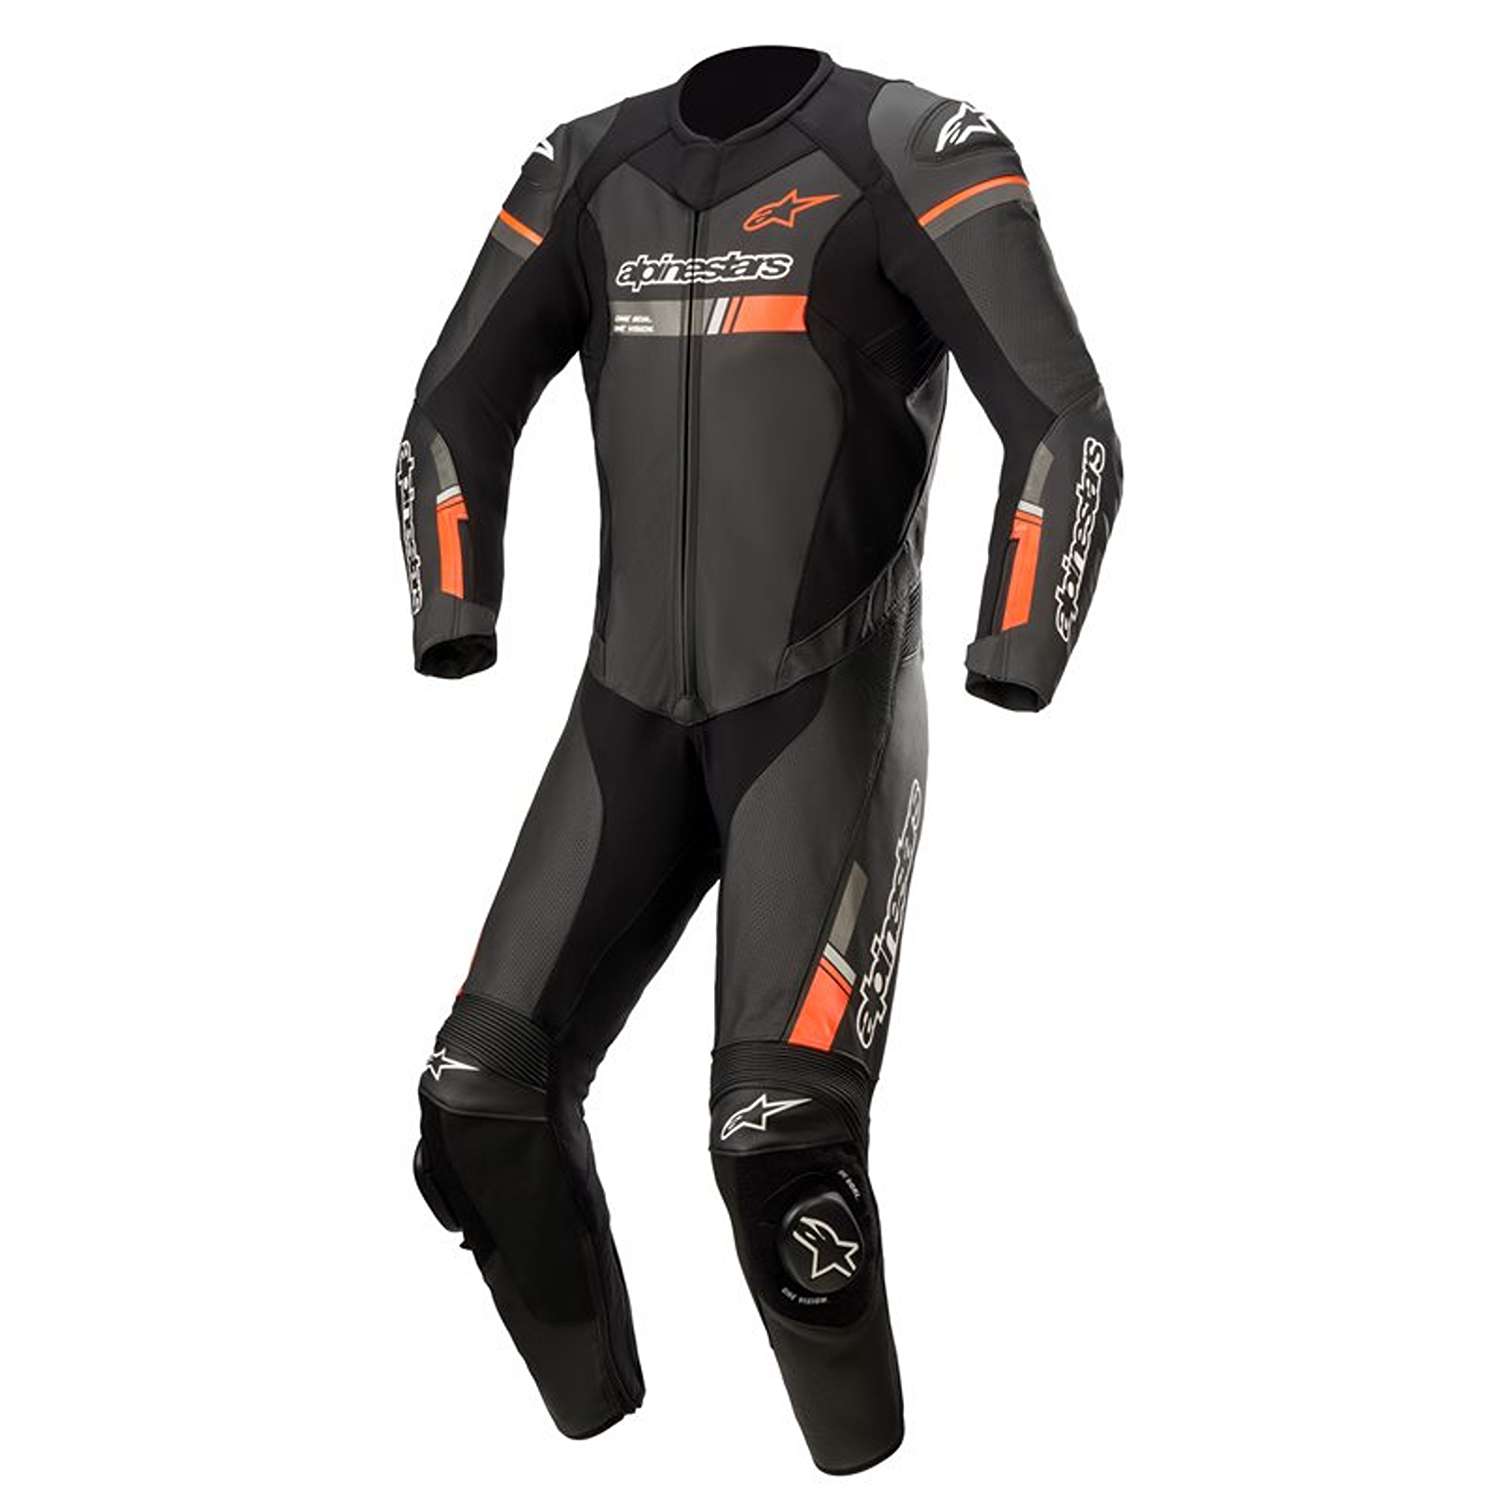 Image of Alpinestars Gp Force Chaser Leather Suit 1 Pc Black Red Fluo Size 58 ID 8059175351525